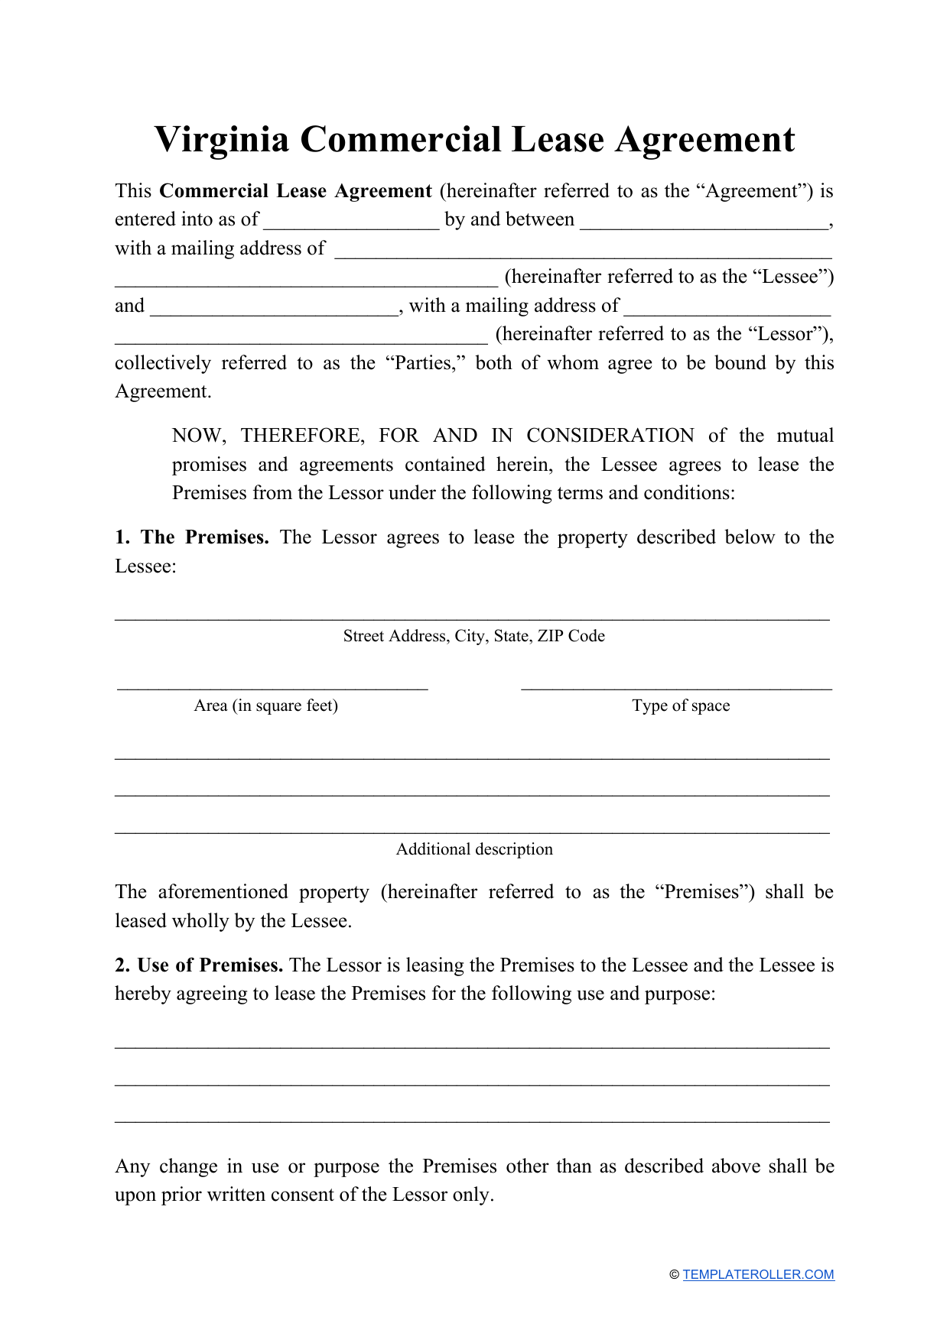 Virginia Commercial Lease Agreement Template Download Printable PDF